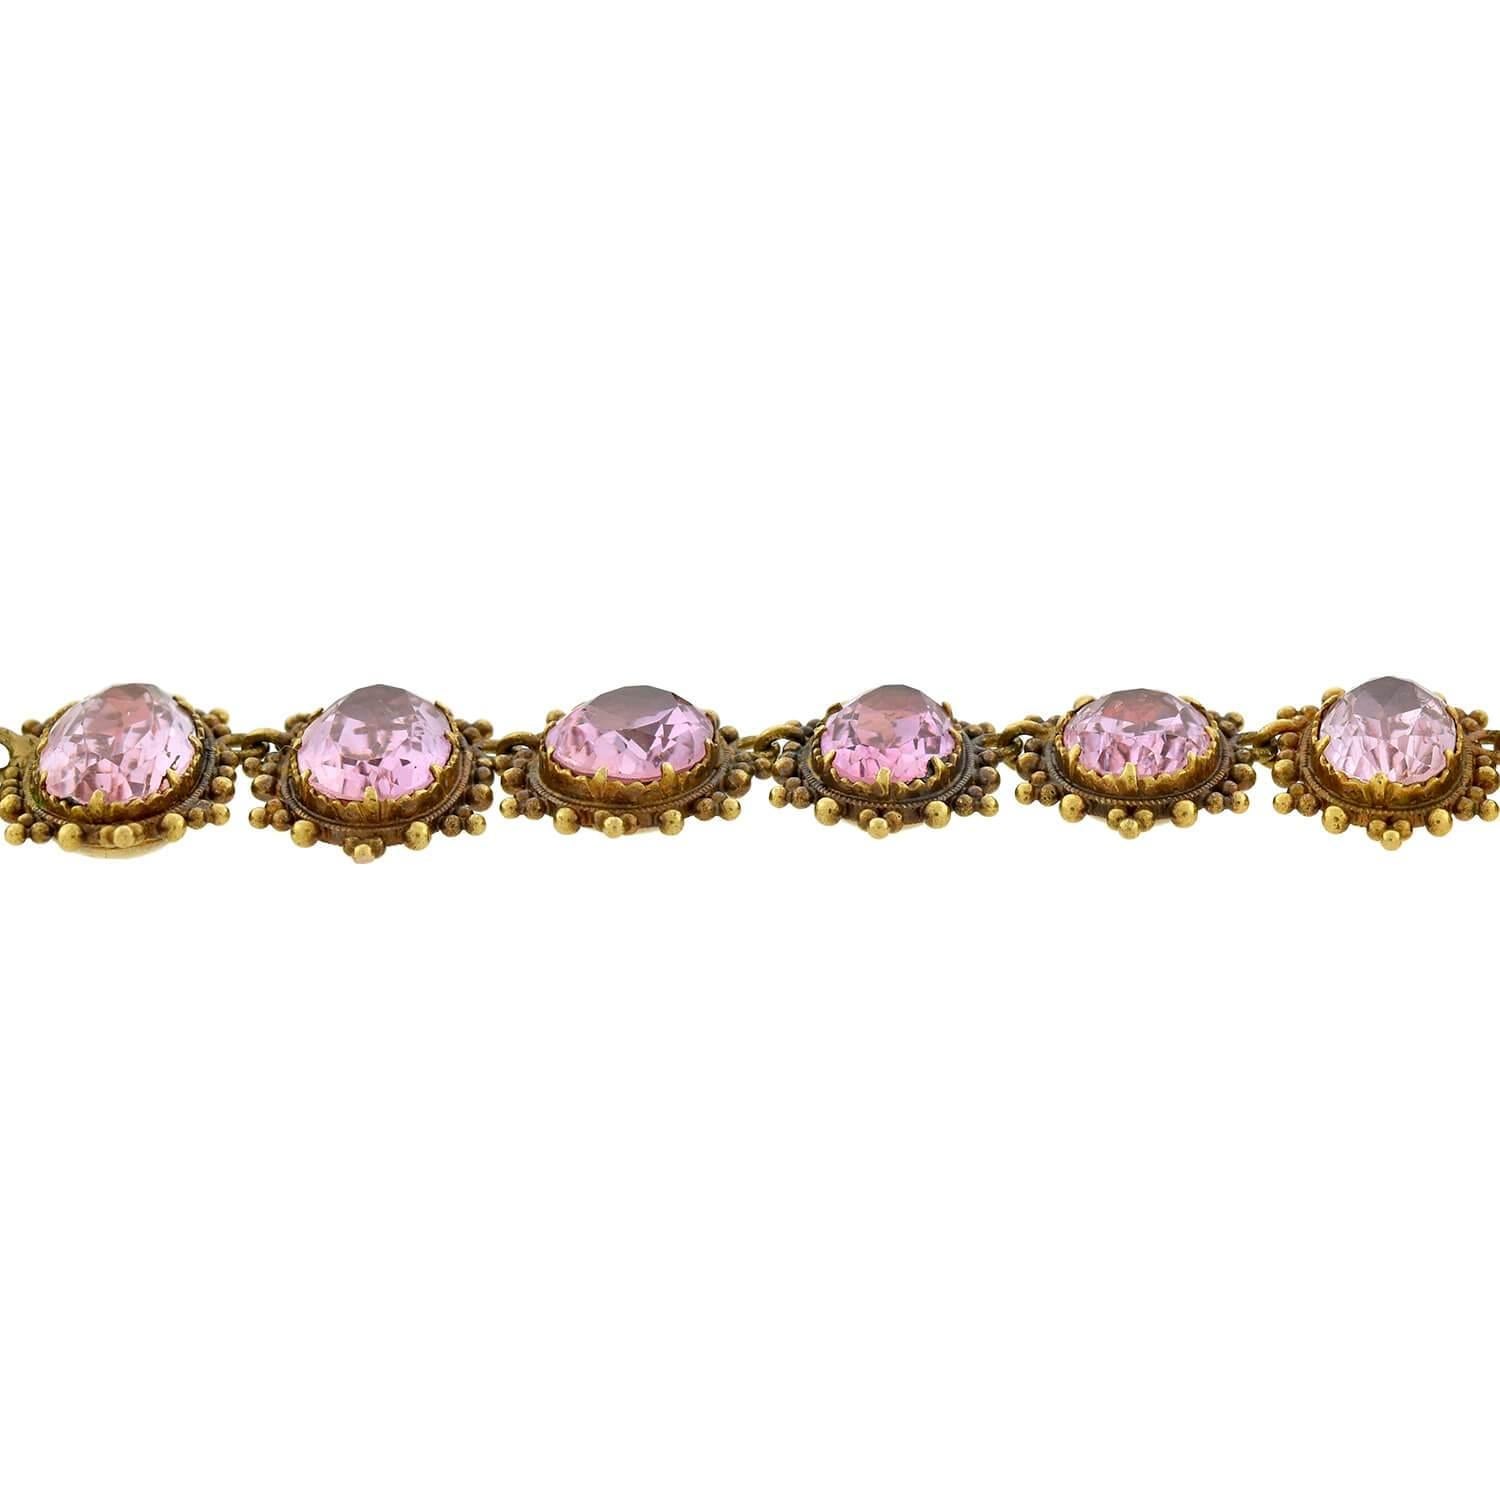 Early Georgian Pink Topaz Necklace and Earring Demi-Parure Set In Fair Condition For Sale In Narberth, PA